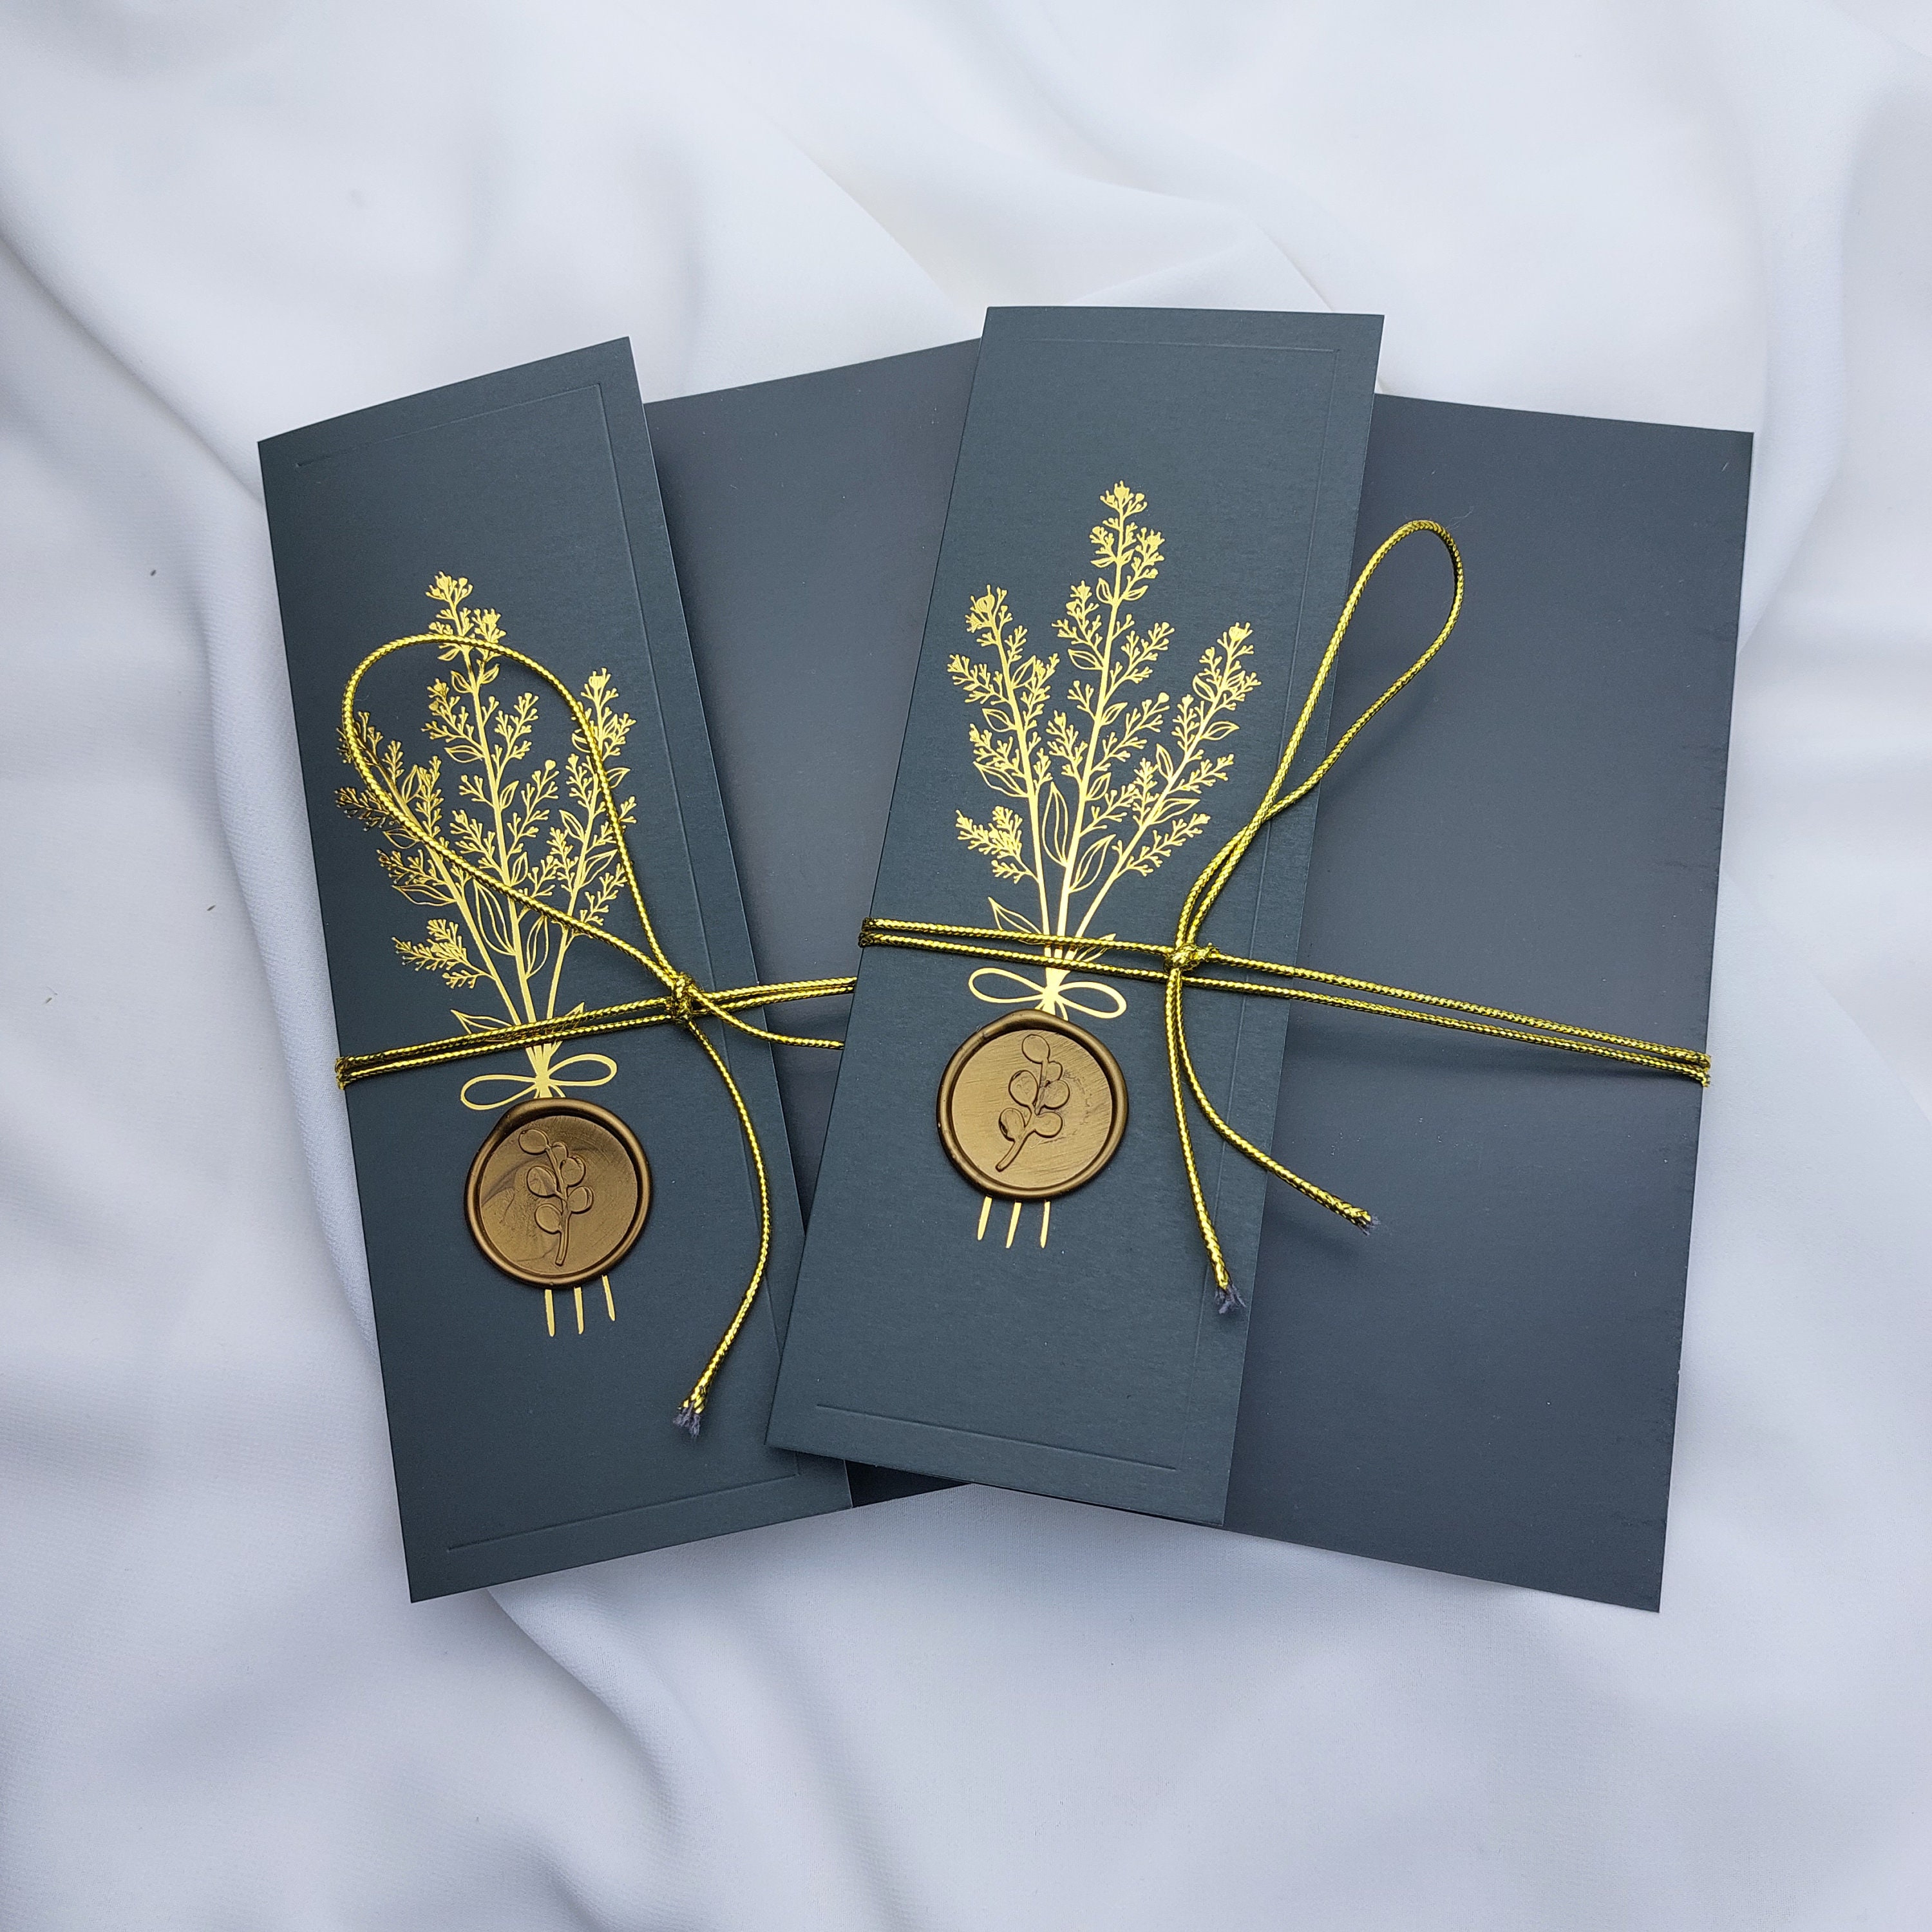 How to DIY Your Wedding Invitations Unique with Wax Seals -   Blog